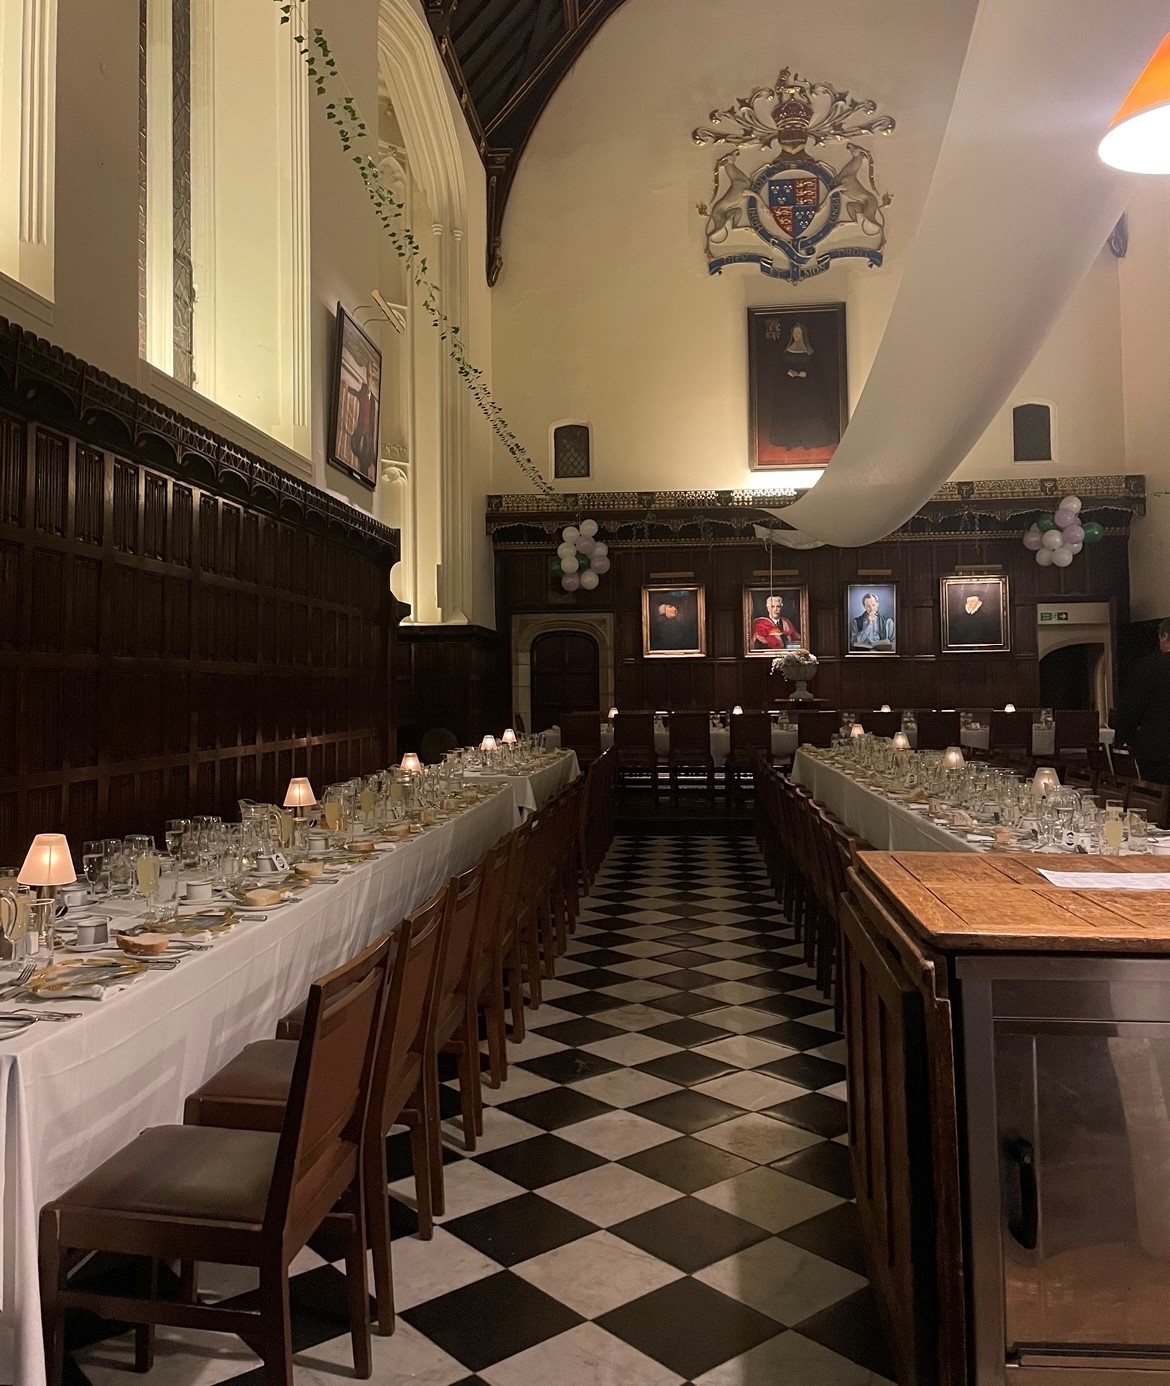 A formal dining hall, set with plates and glasses